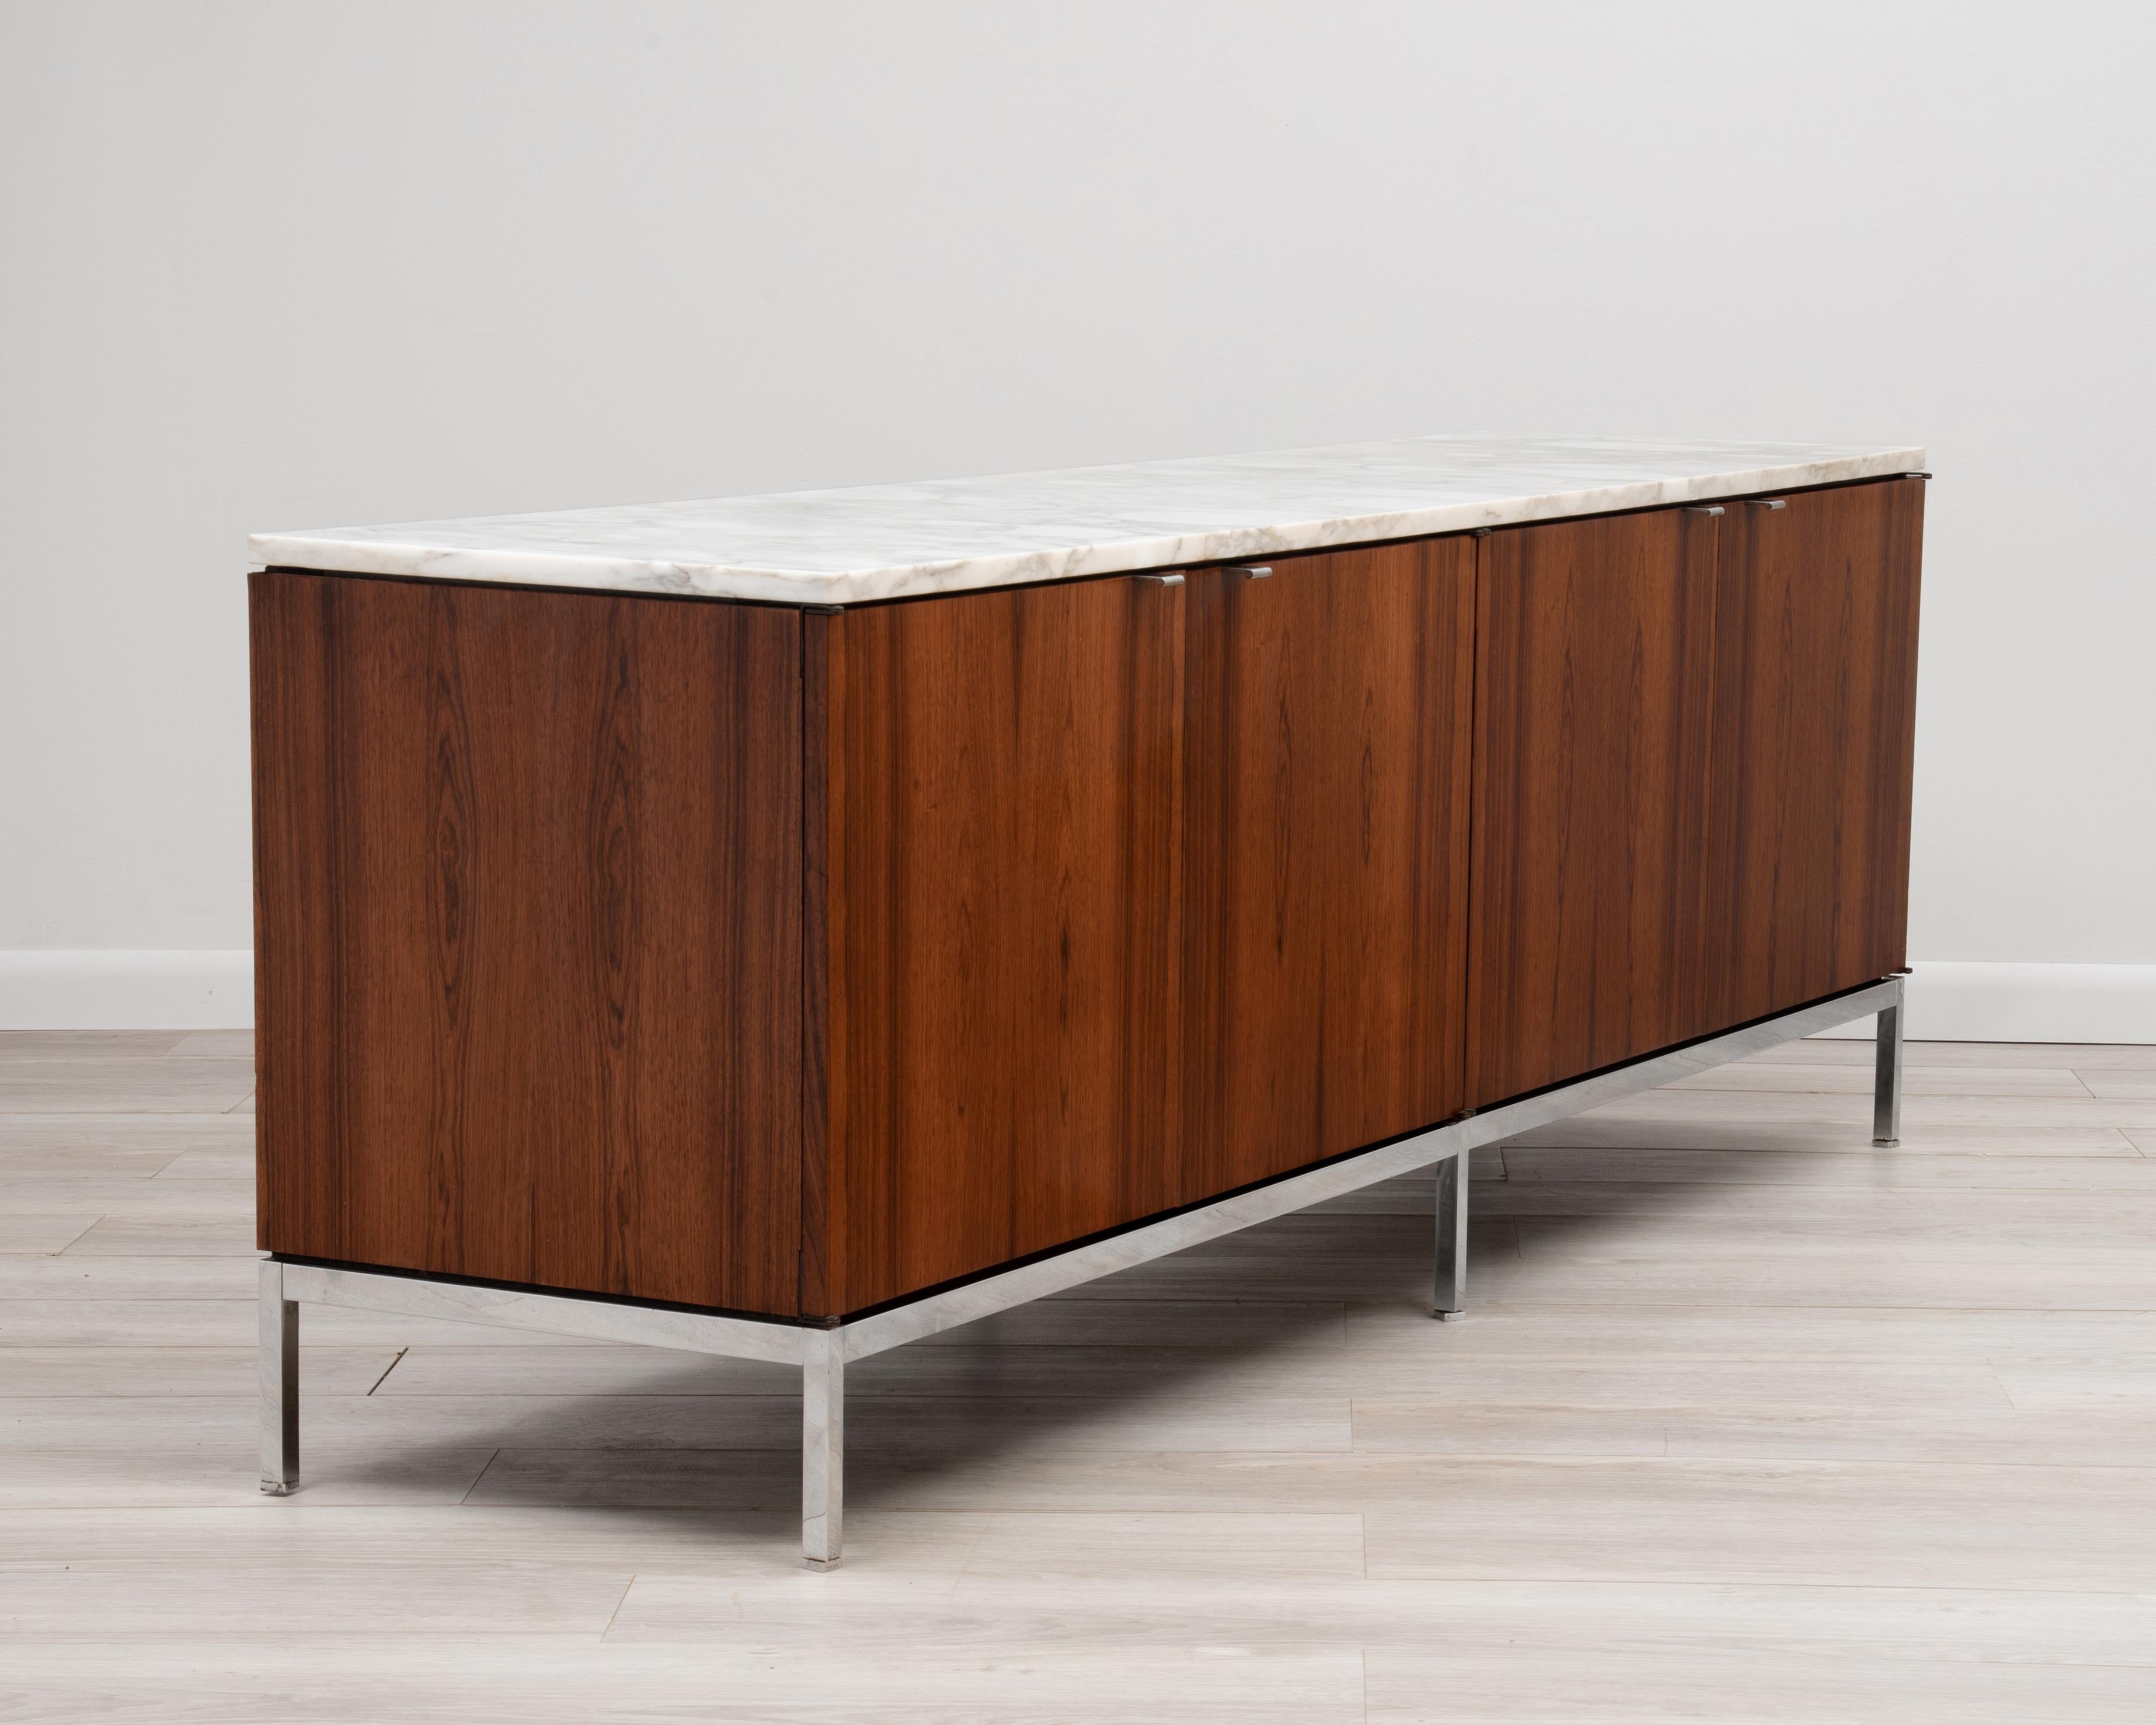 North American Florence Knoll Four Position Credenza Rosewood Marble Chrome Steel 1960s